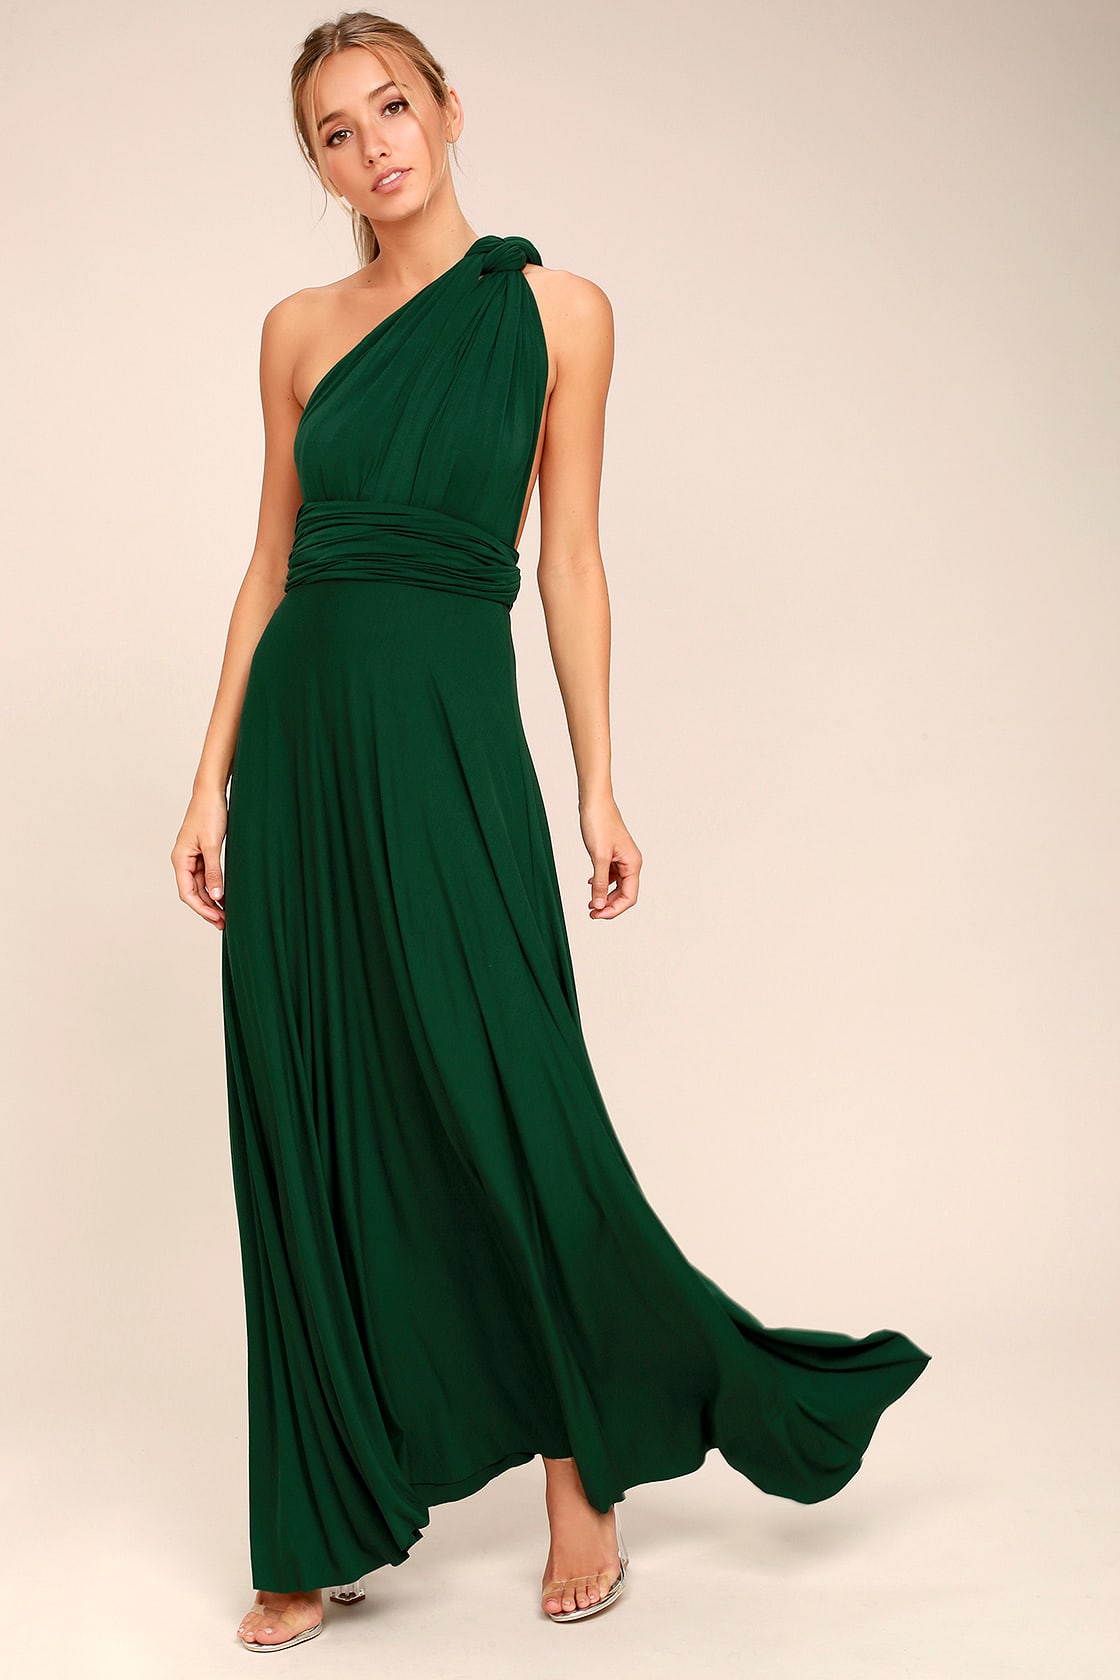 Tricks of the Trade Forest Green Maxi Dress